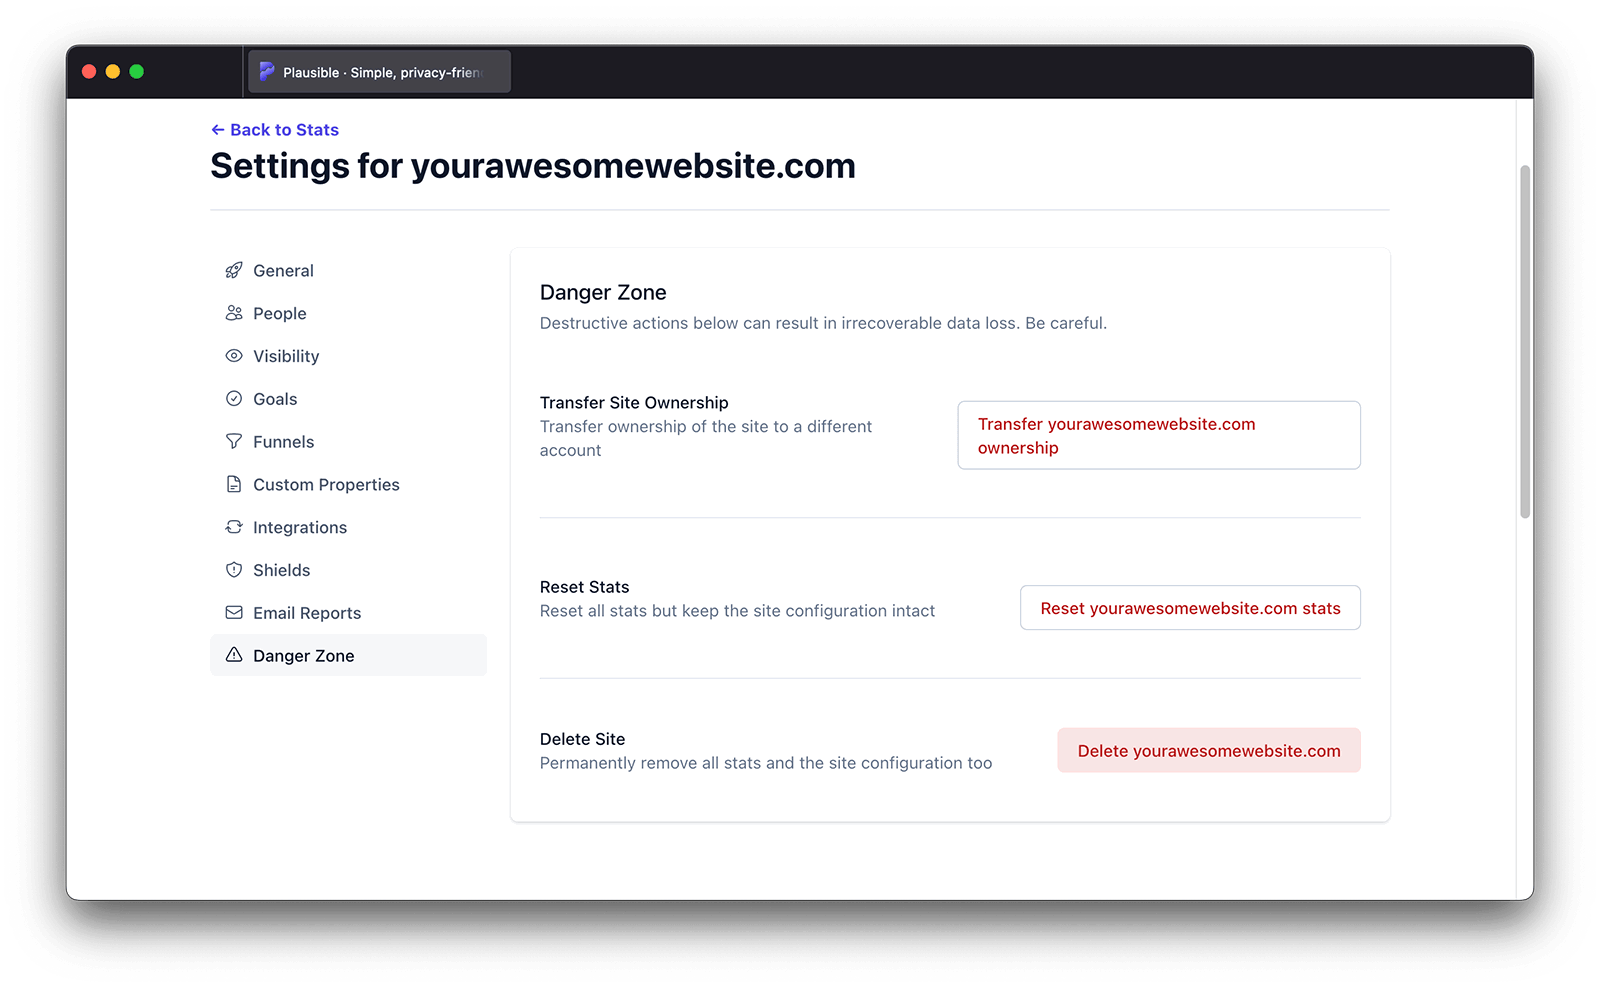 Reset your site data